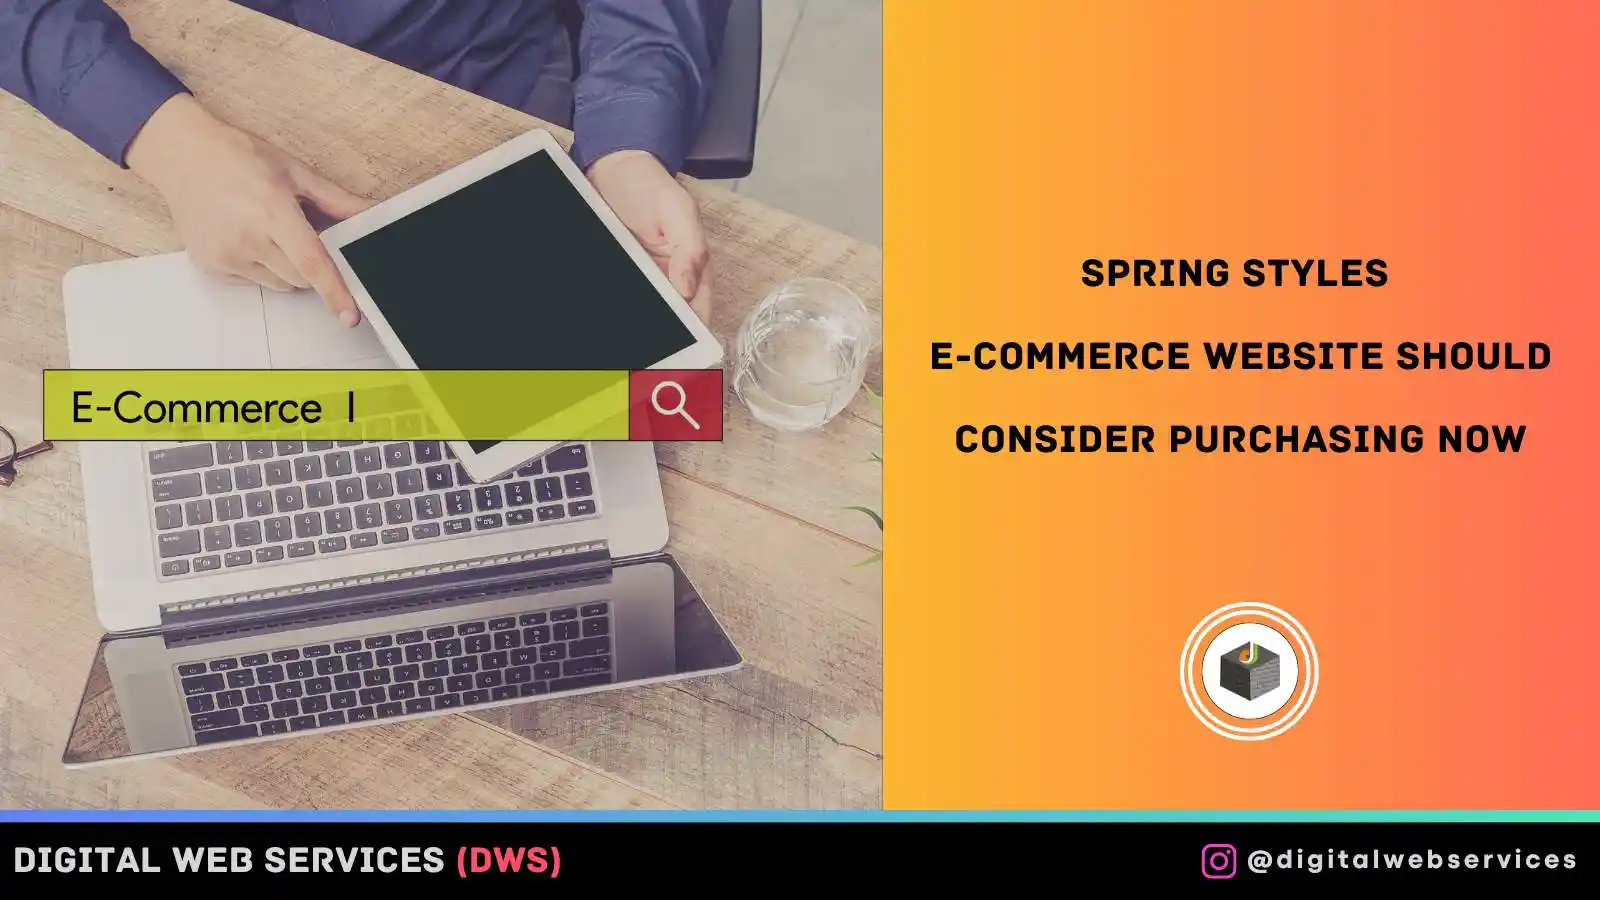 Spring Styles eCommerce Website Should Consider Purchasing Now